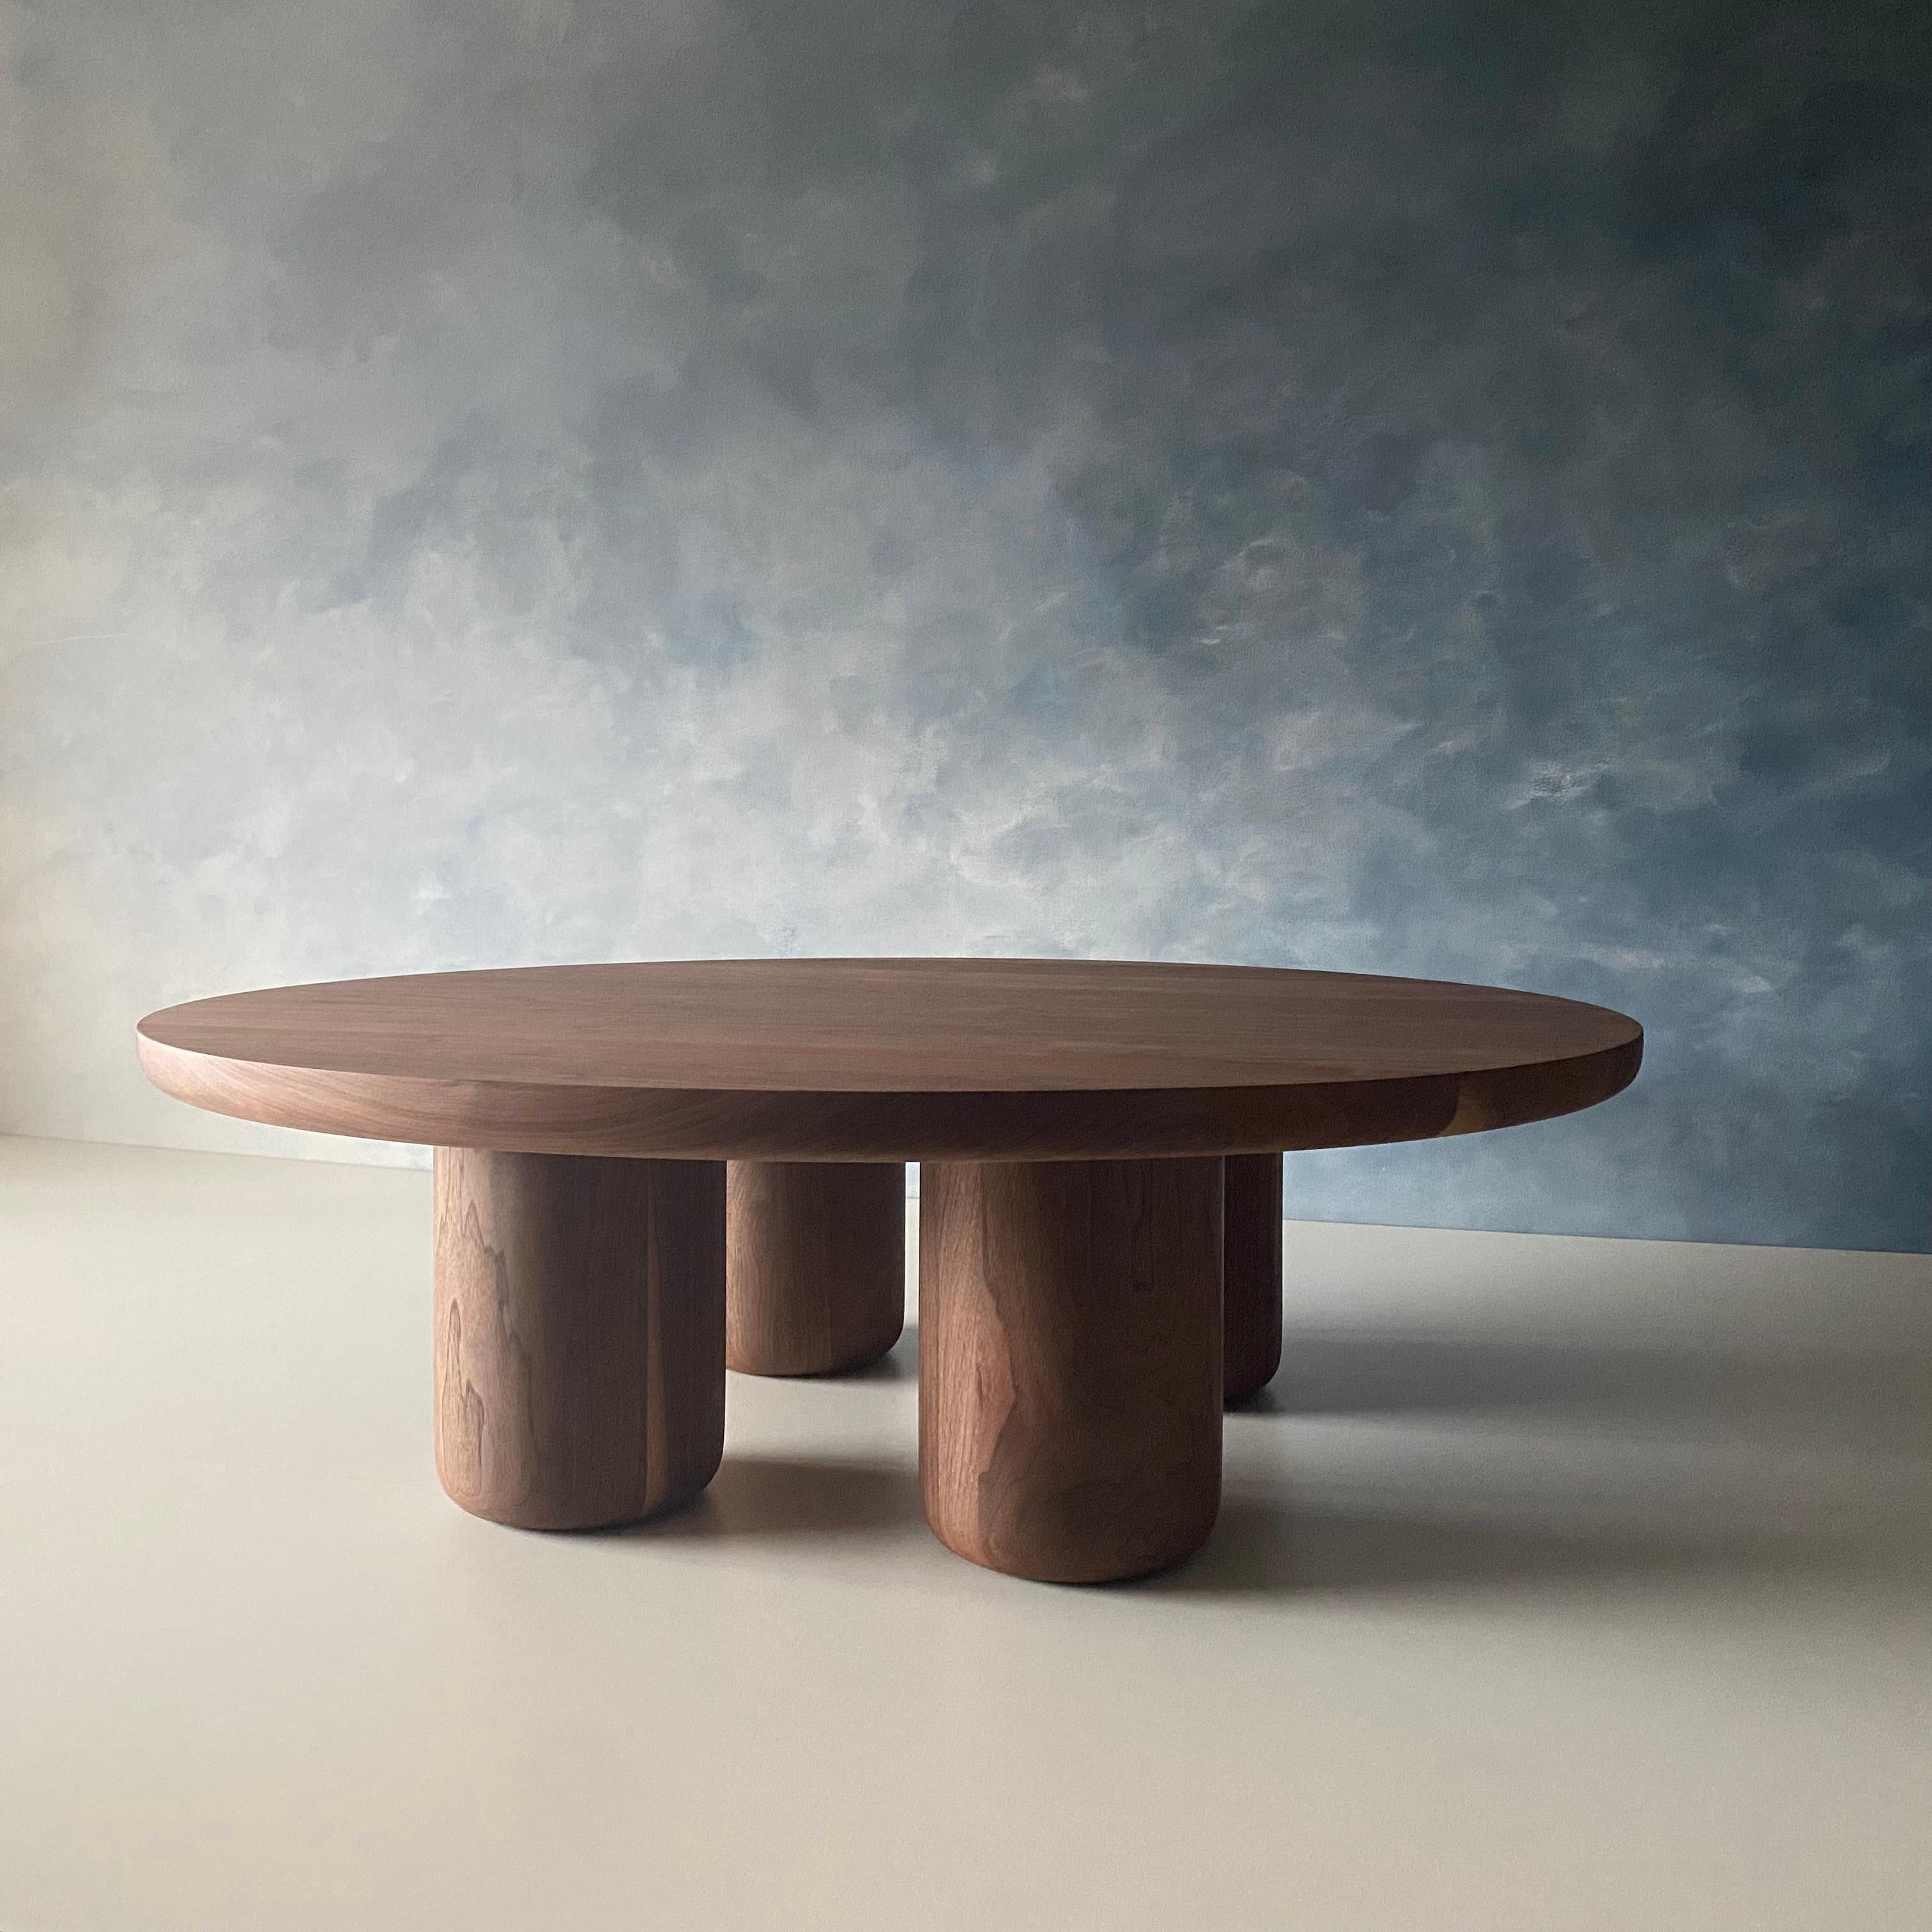 Our Tusker coffee table blends well in modern homes looking for something with a little character. Strong bold and robust with solid walnut legs turned by hand in our Vancouver based studio. Shown here in walnut with a semi-matte finish. Can be made